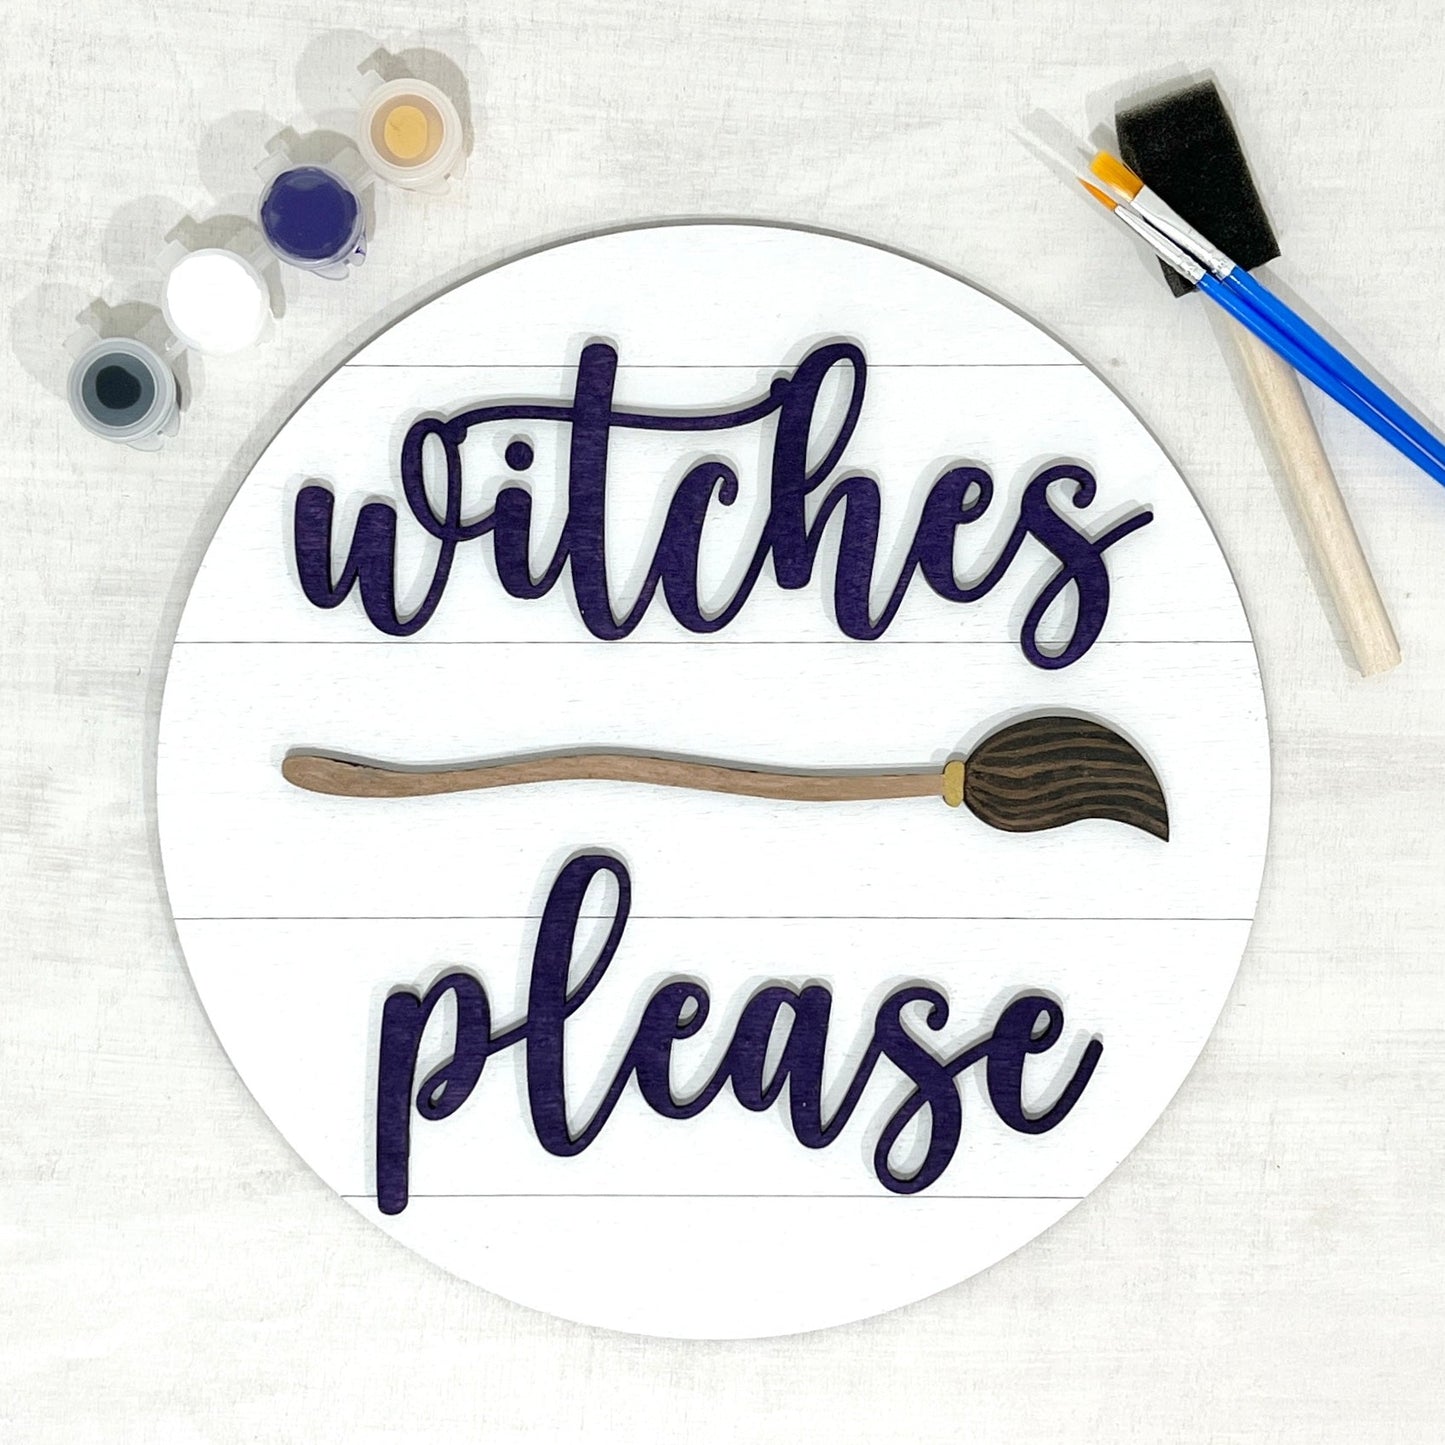 witches please sign paint kit - broomstick halloween paint party kits - DIY fall holiday decorations - Celebrating Together